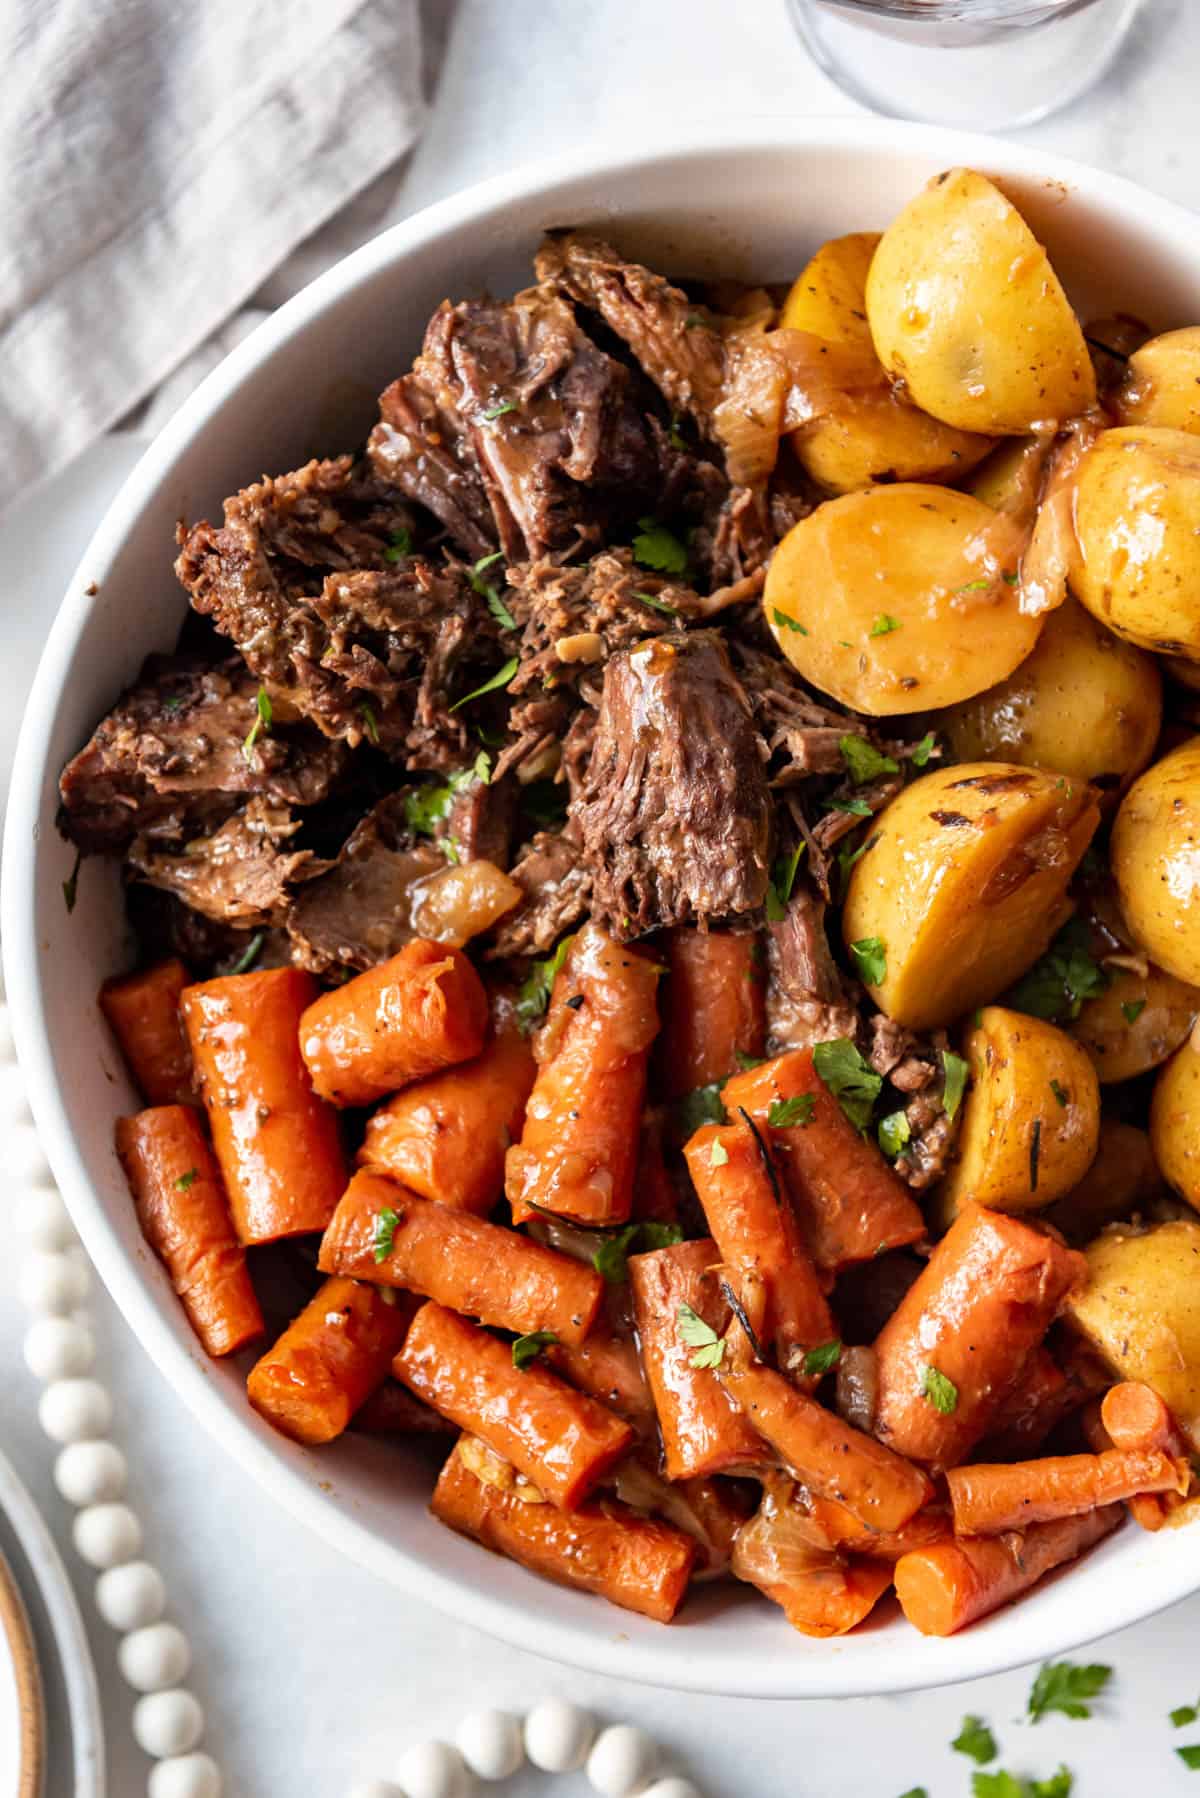 An overhead image of large chunks of roasted carrots, pot roast, and Yukon gold potatoes in a white serving bowl.